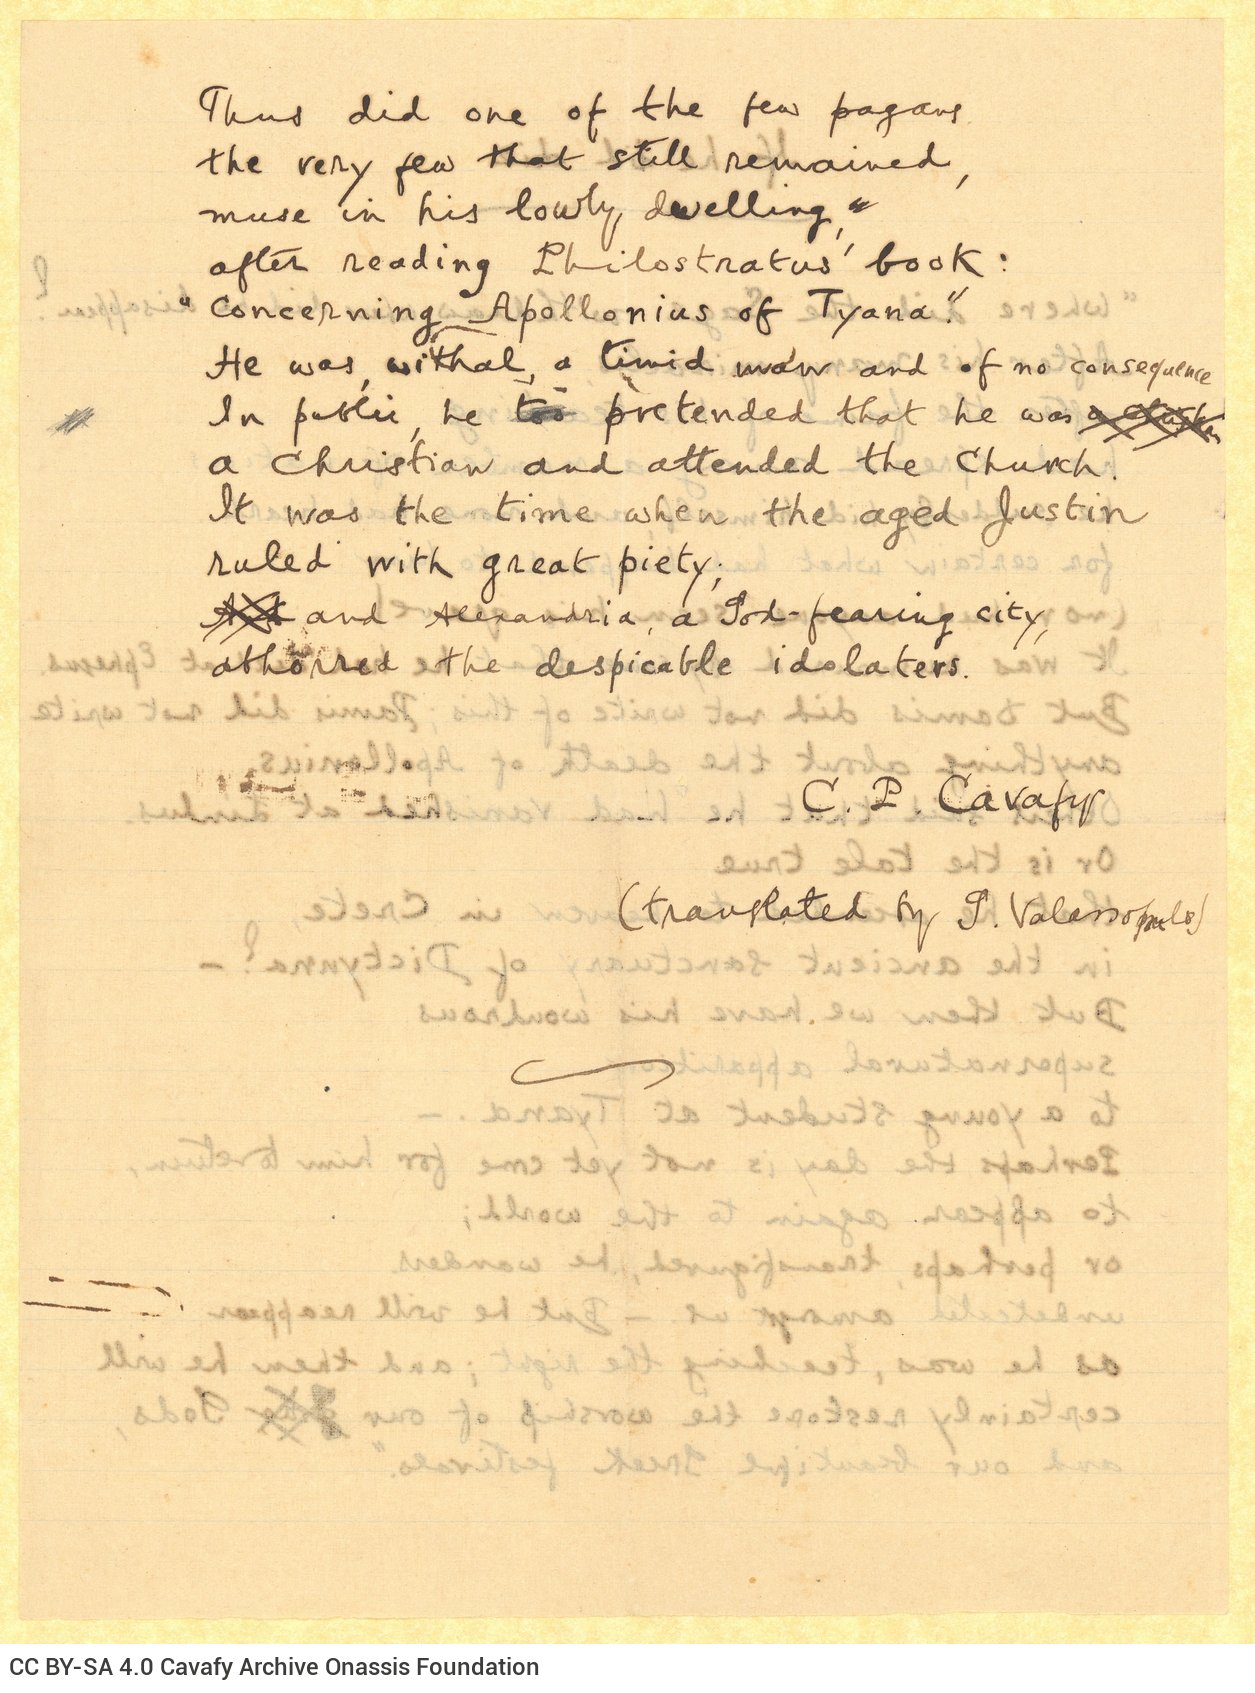 Manuscript by Cavafy with the English translation of the poem "If Indeed He Died" by G. Valassopoulo, on both sides of a r